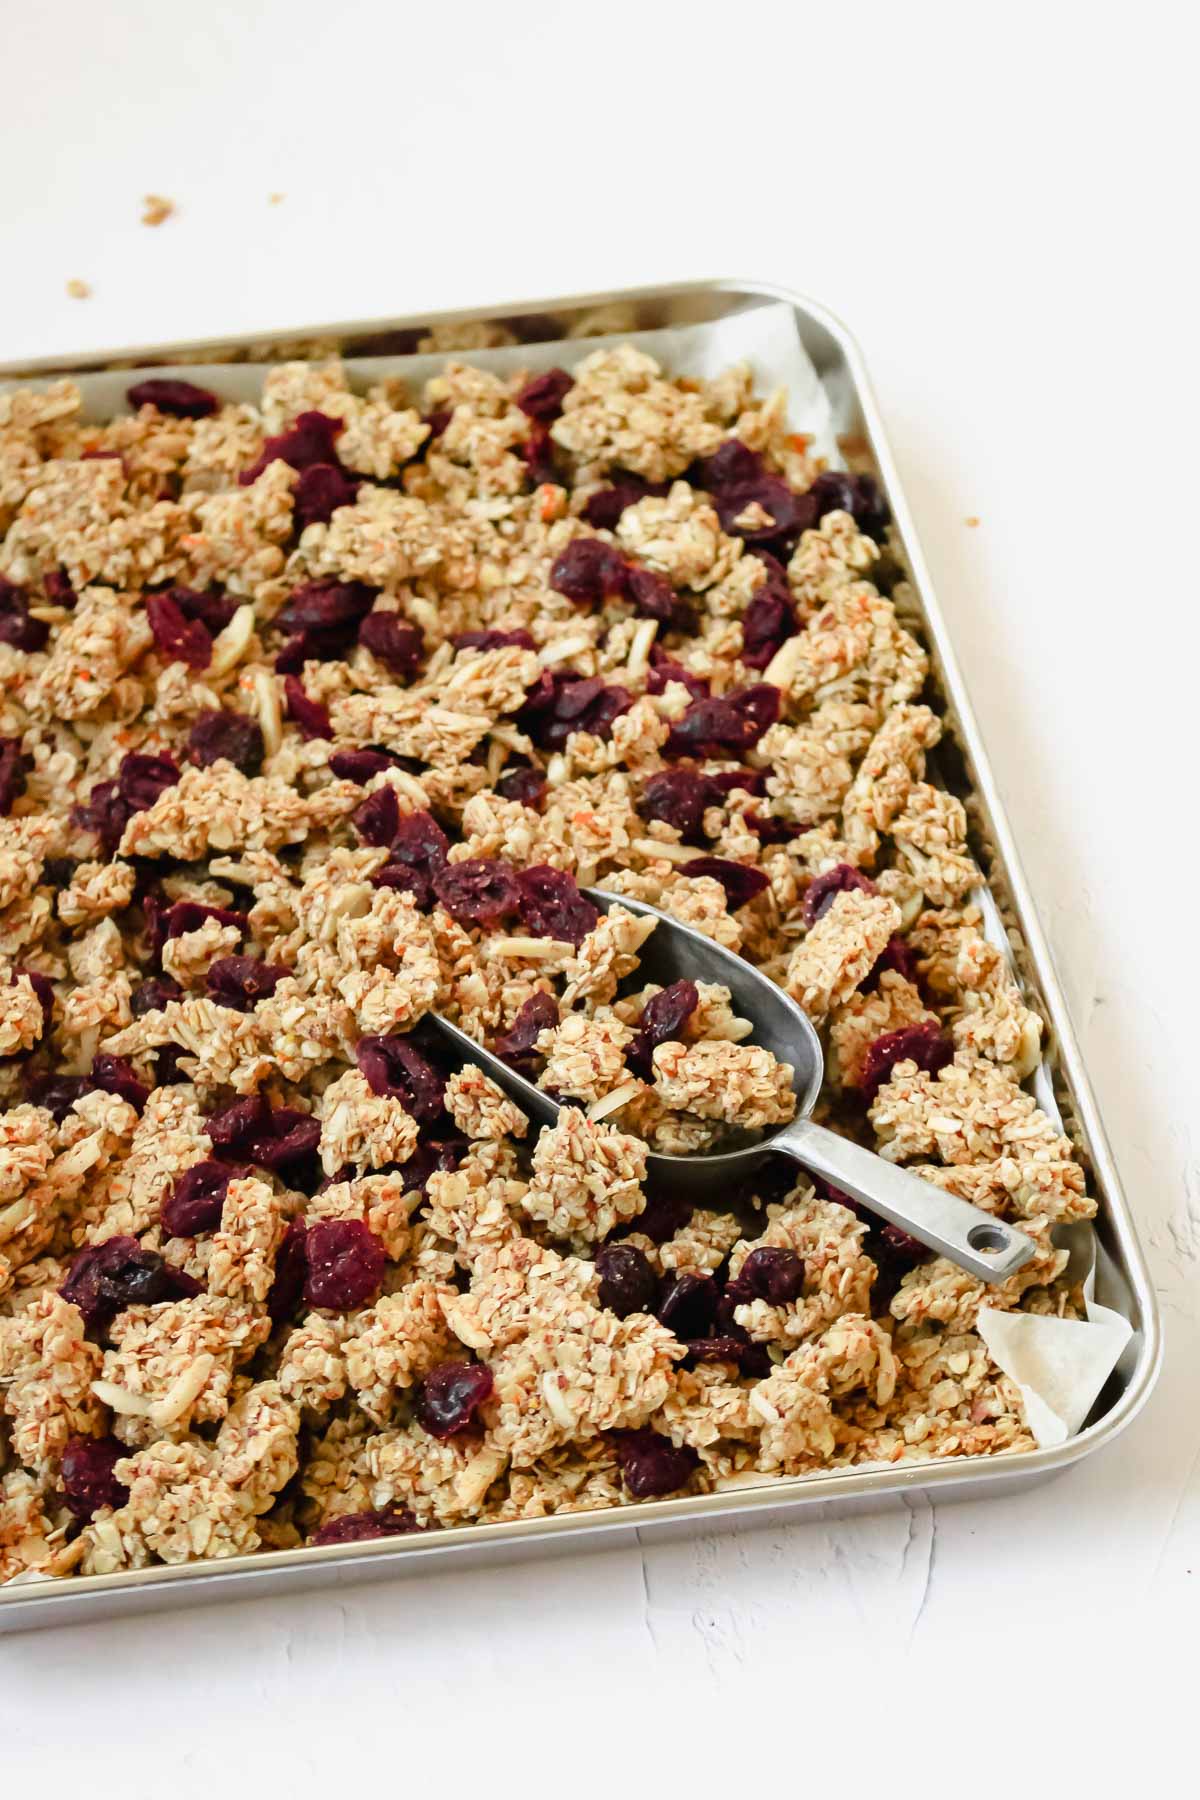 holiday spiced granola with cranberries on baking sheet with vintage serving spoon.